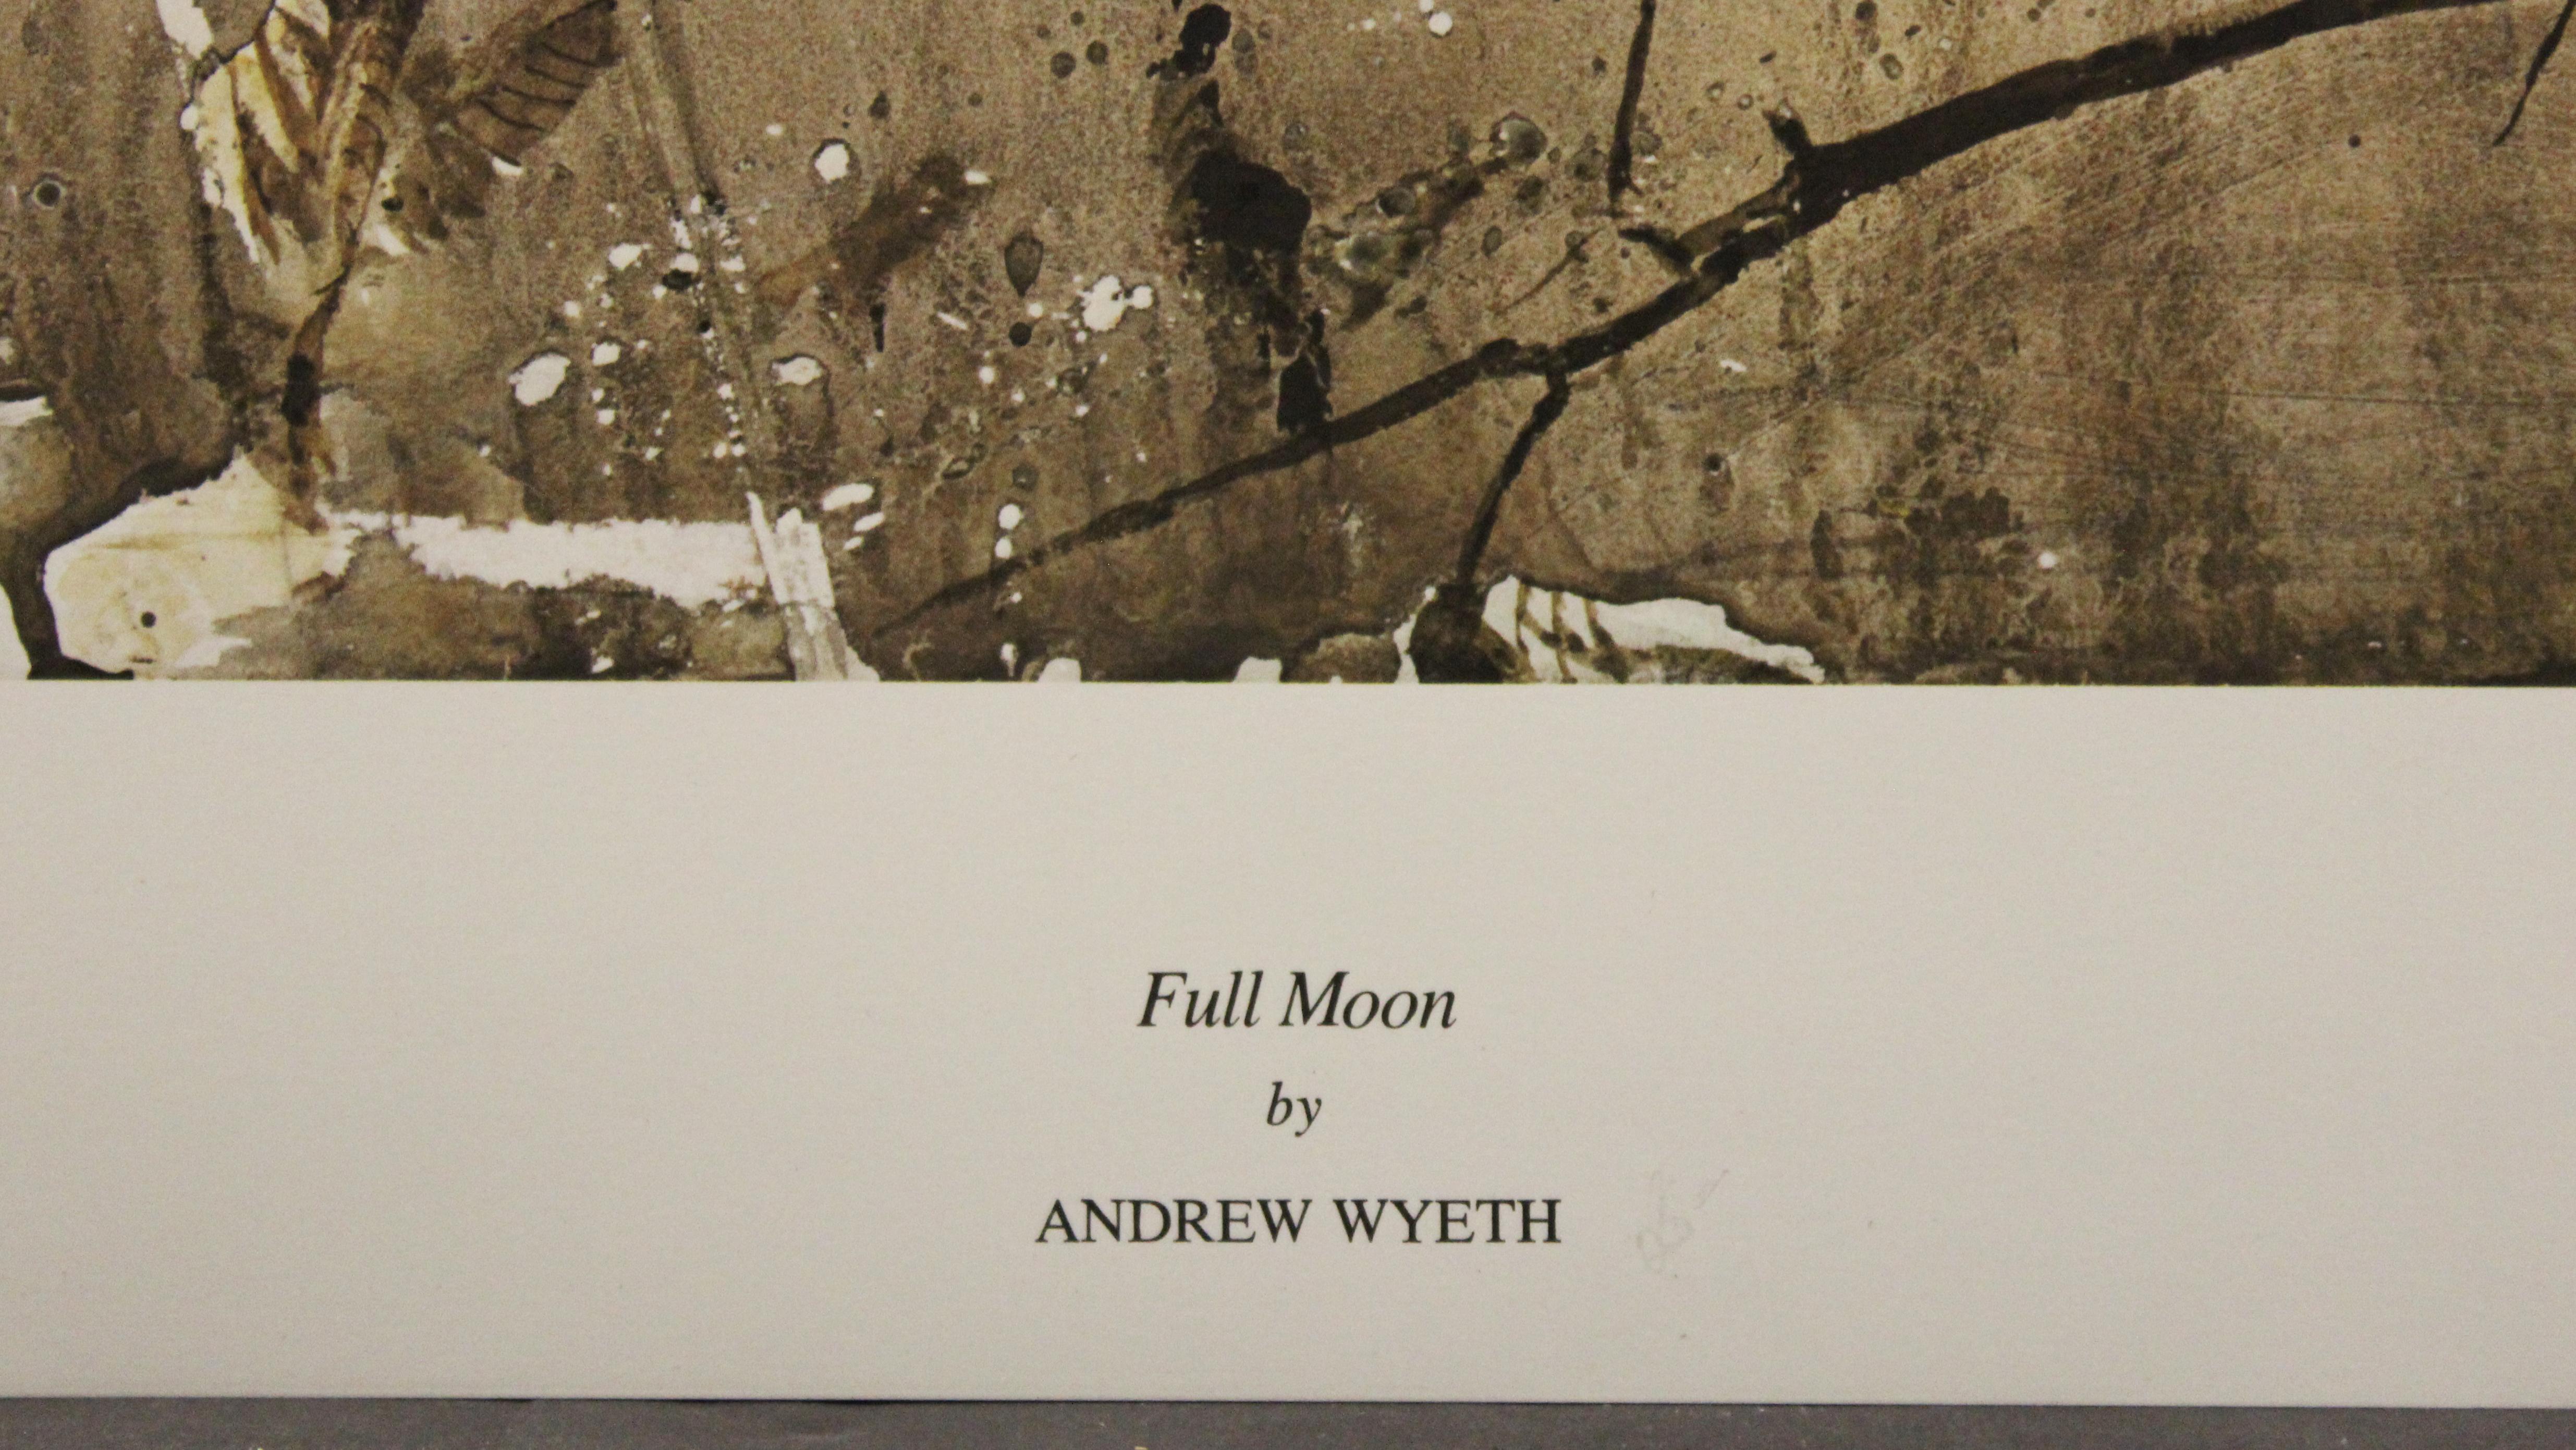 Full Moon-Poster. New York Graphic Society, Ltd.  - Print by (after) Andrew Wyeth